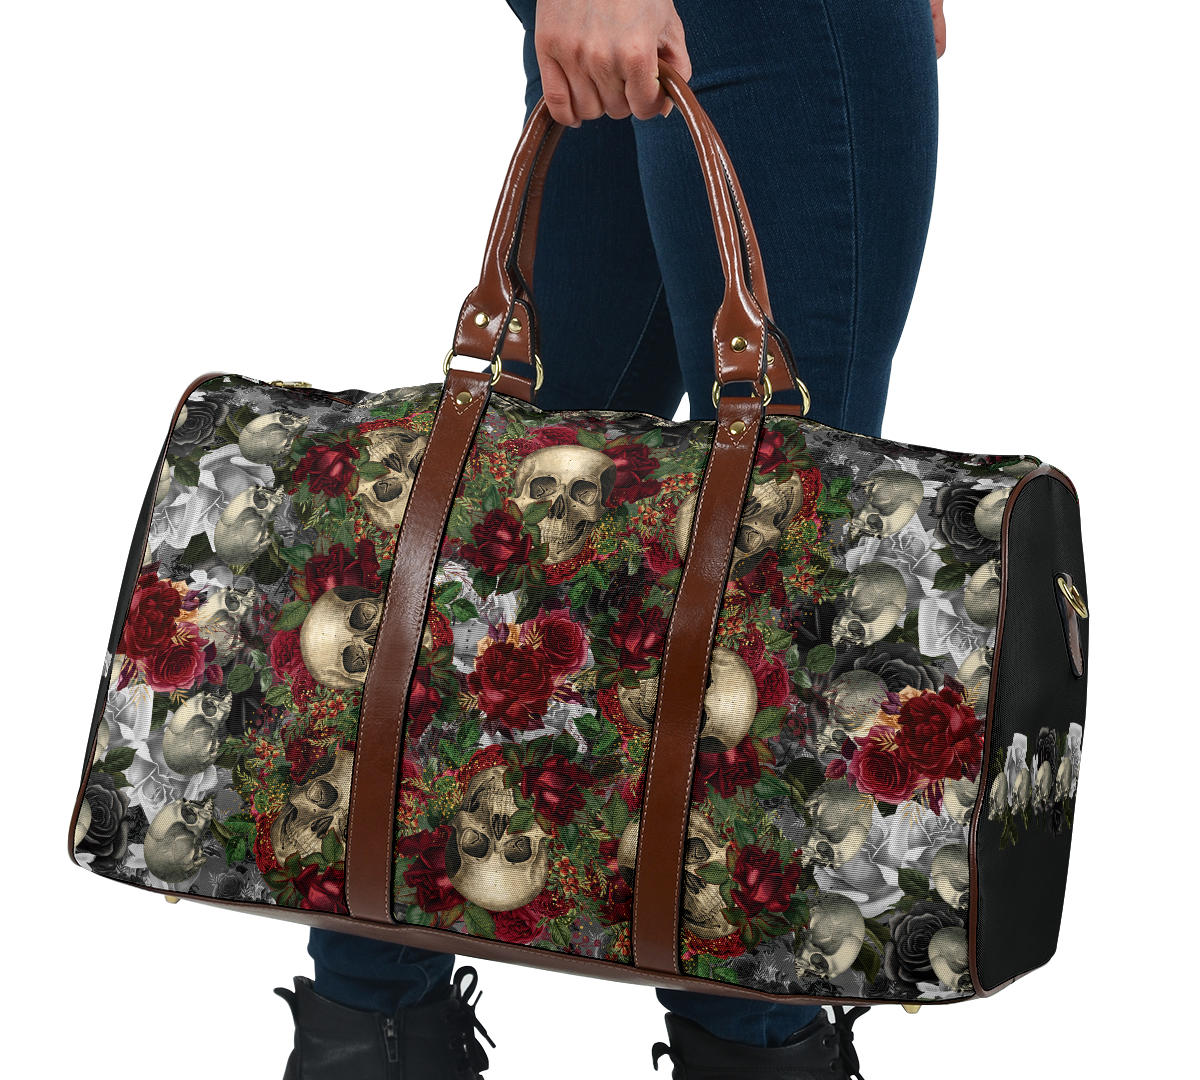 Skulls and Roses on Silver Travel Bag